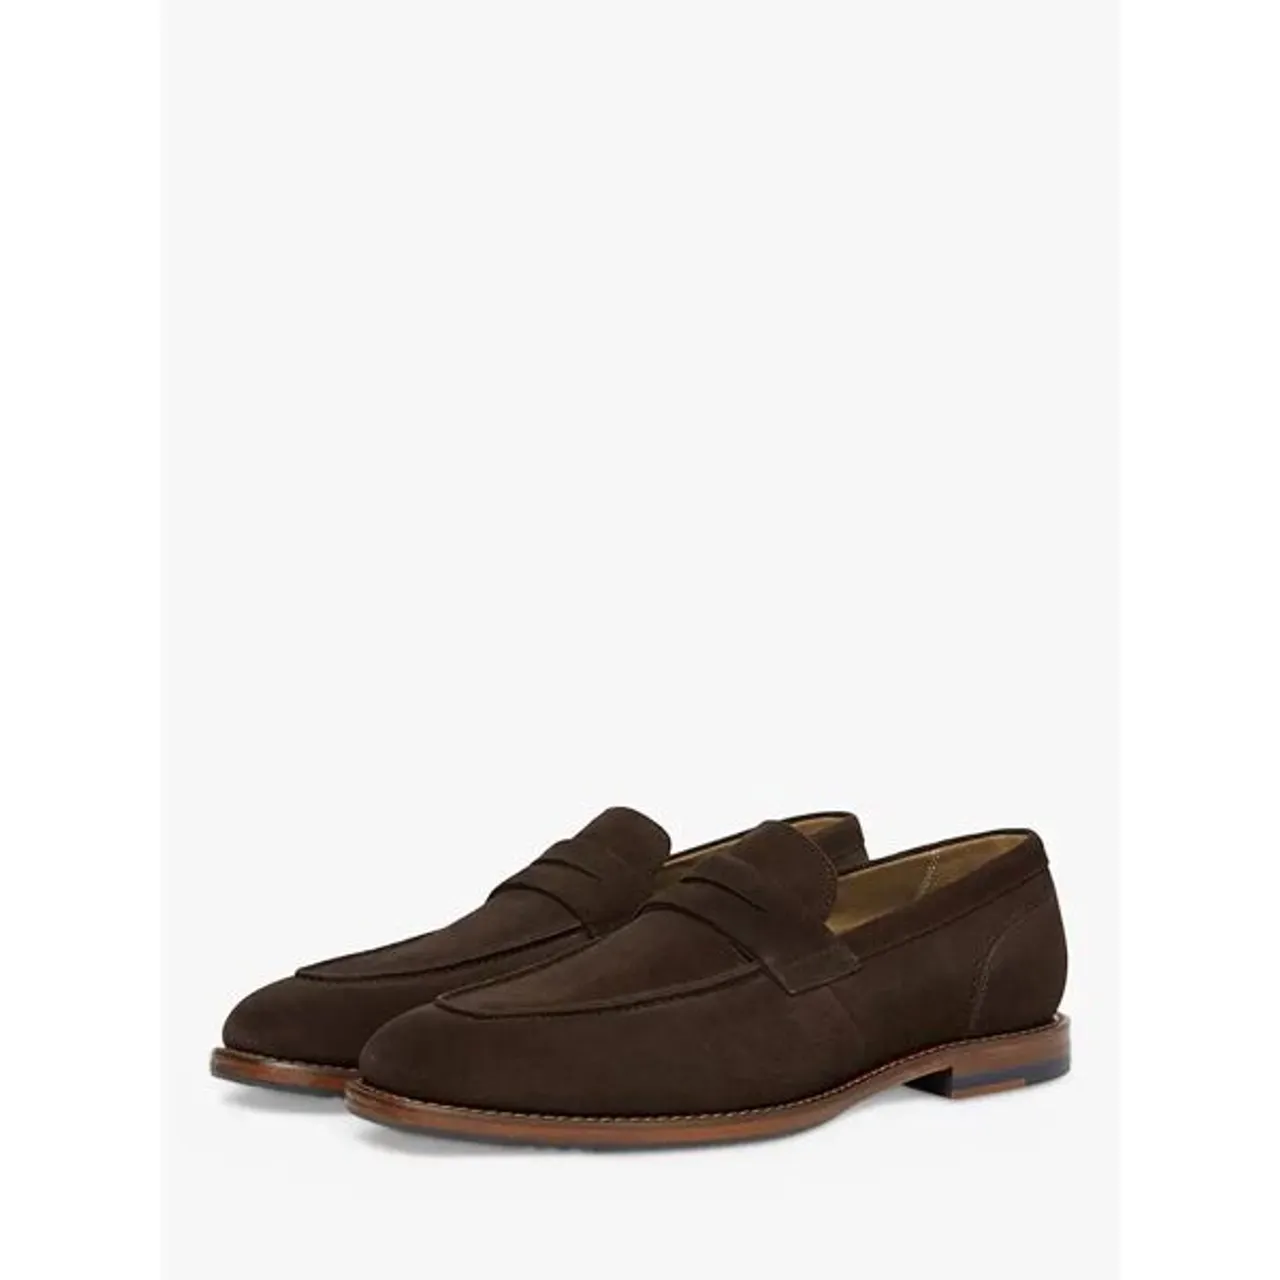 Oliver Sweeney Buckland Suede Loafers, Chocolate - Chocolate Suede - Male